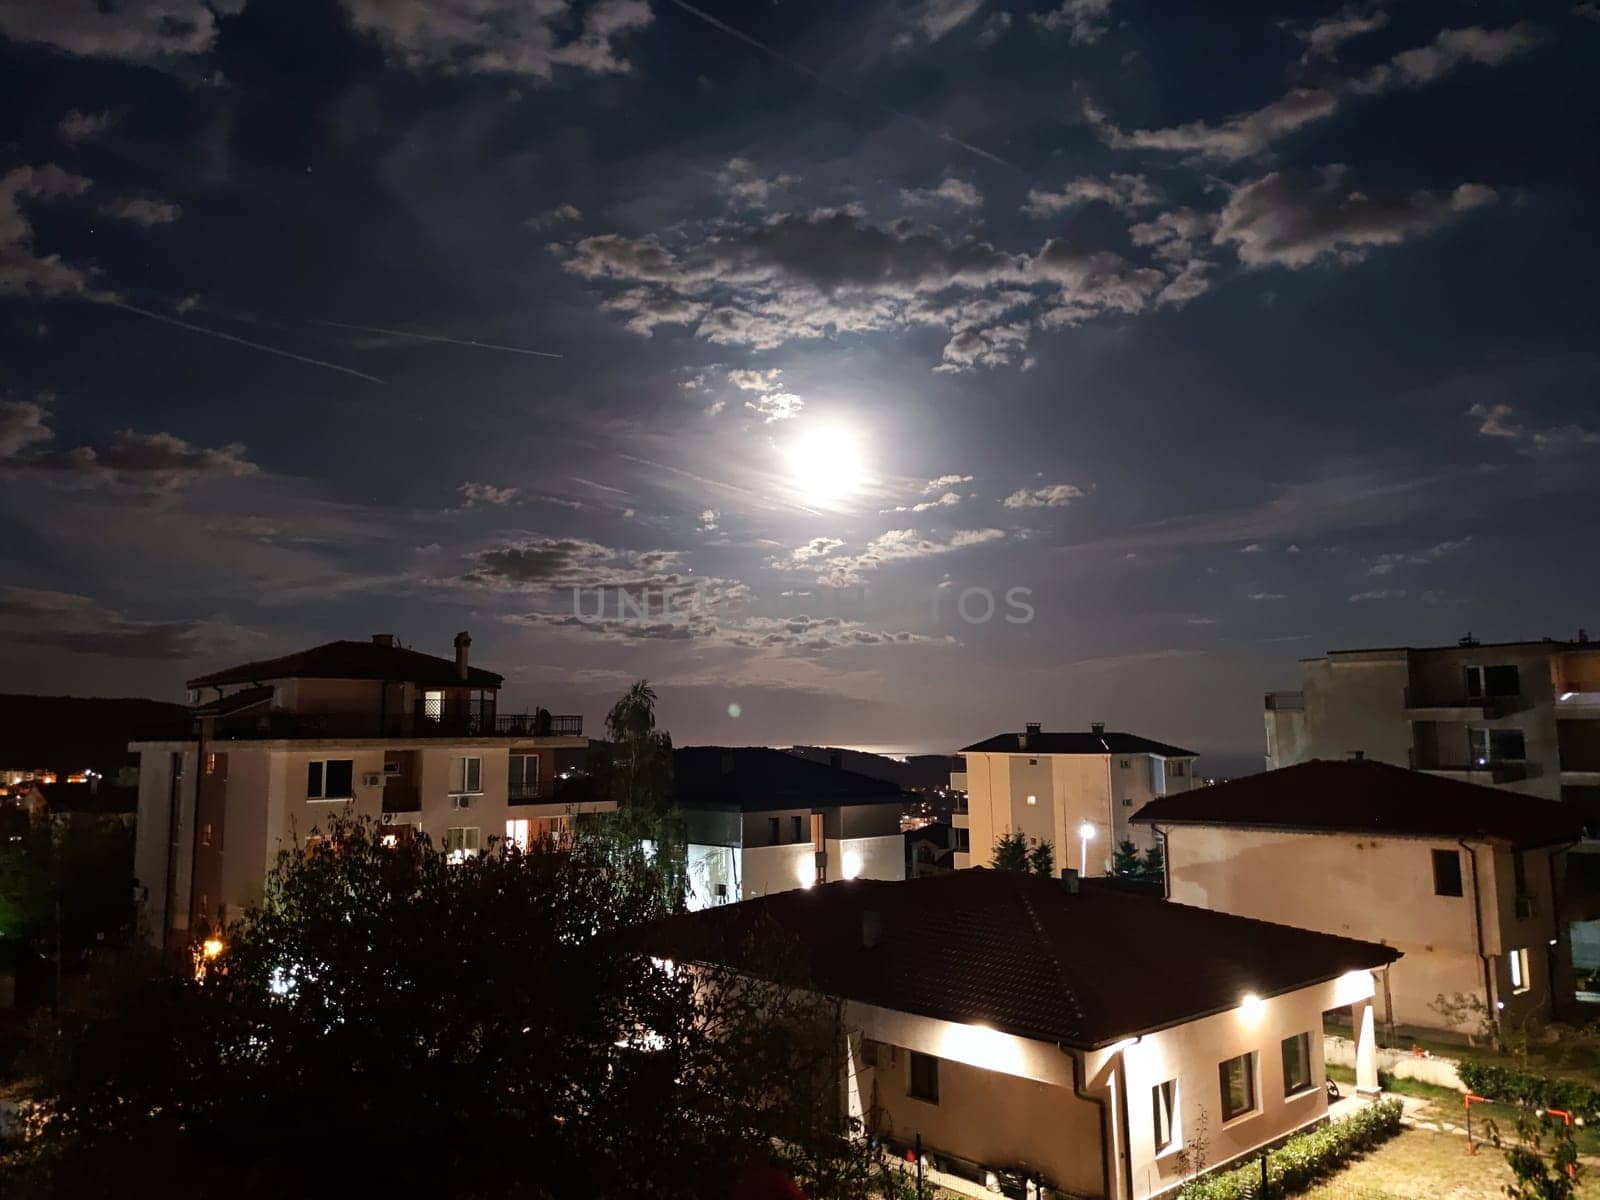 moon in the cloudy night sky above the houses.